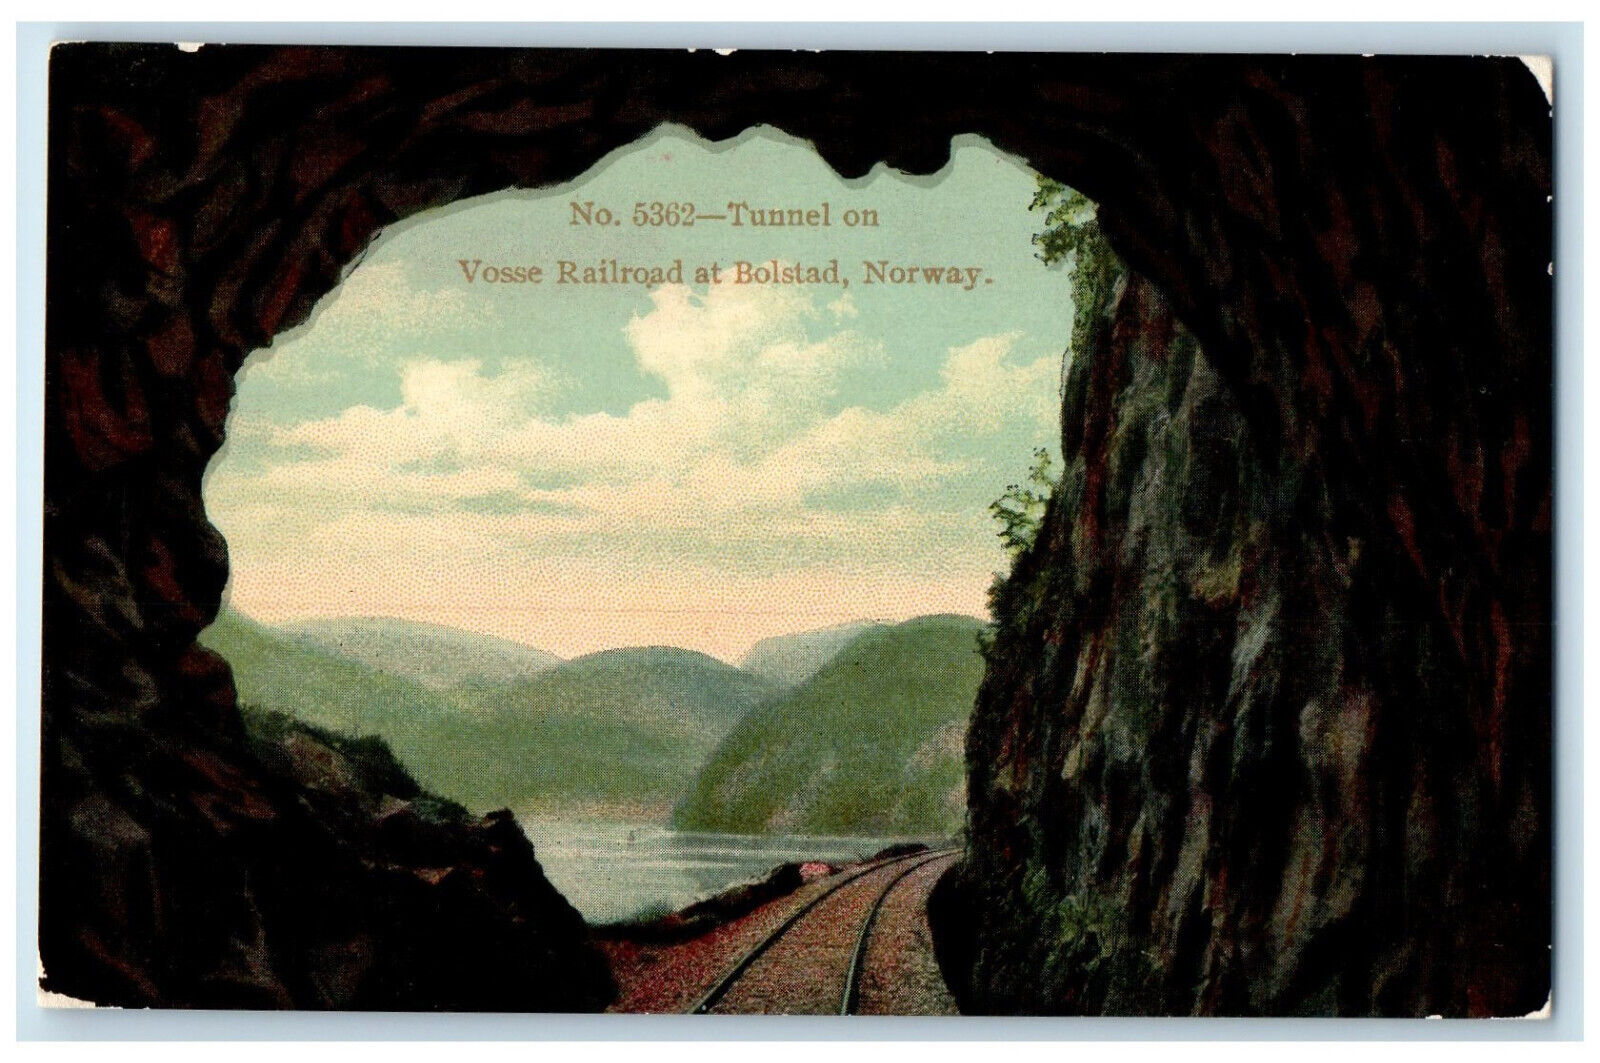 c1910 No.5362 Tunnel on Vosse Railroad at Bolstad Norway Antique Postcard